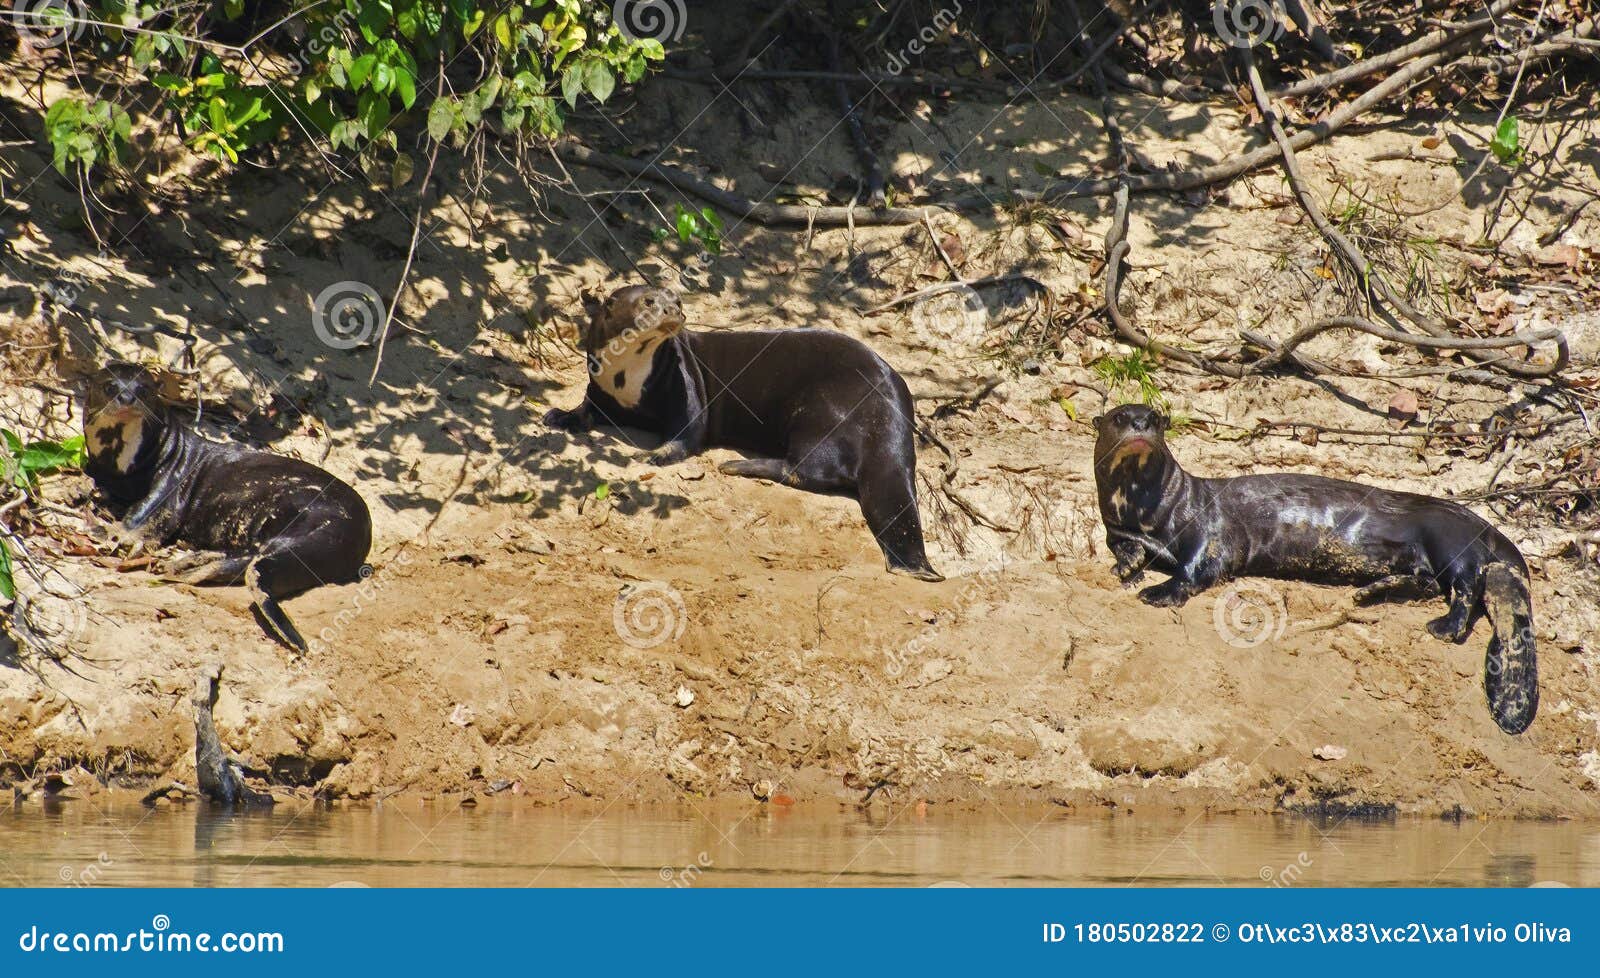 a group of giant river otters pteronura brasiliensis, taking a sun bath, in pantanal, brazil